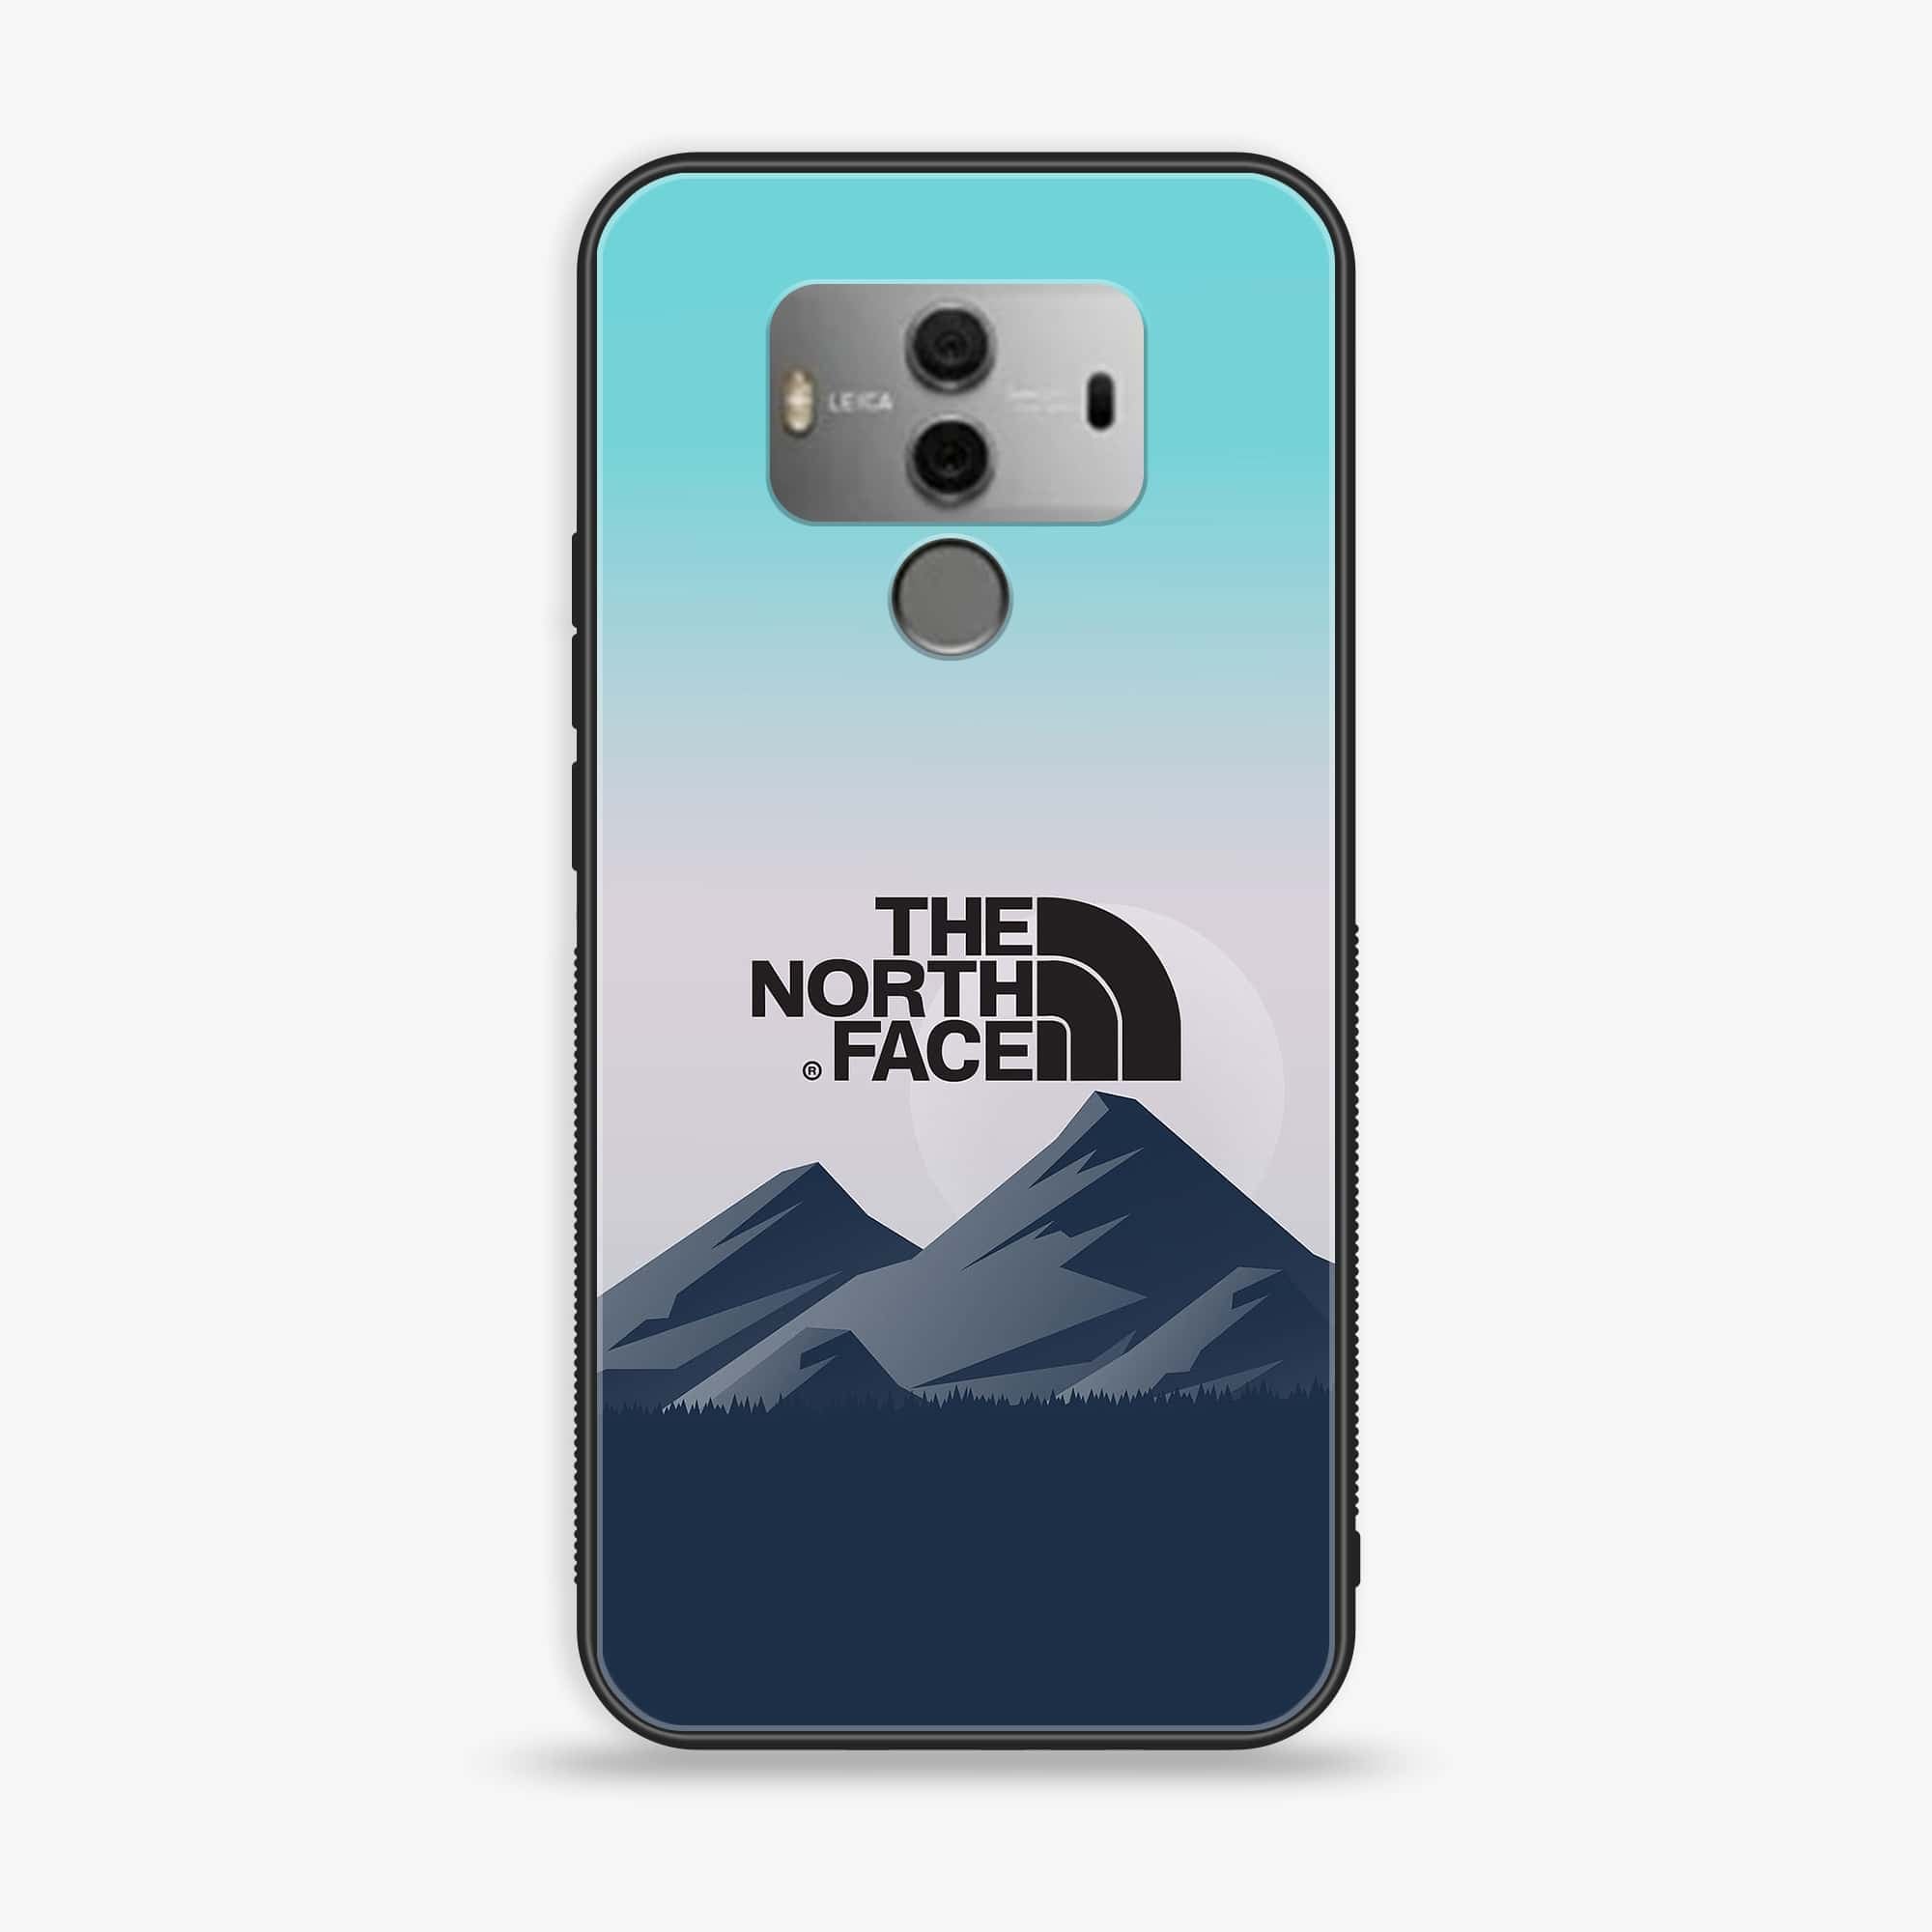 Huawei Mate 10 - The North Face Series - Premium Printed Glass soft Bumper shock Proof Case